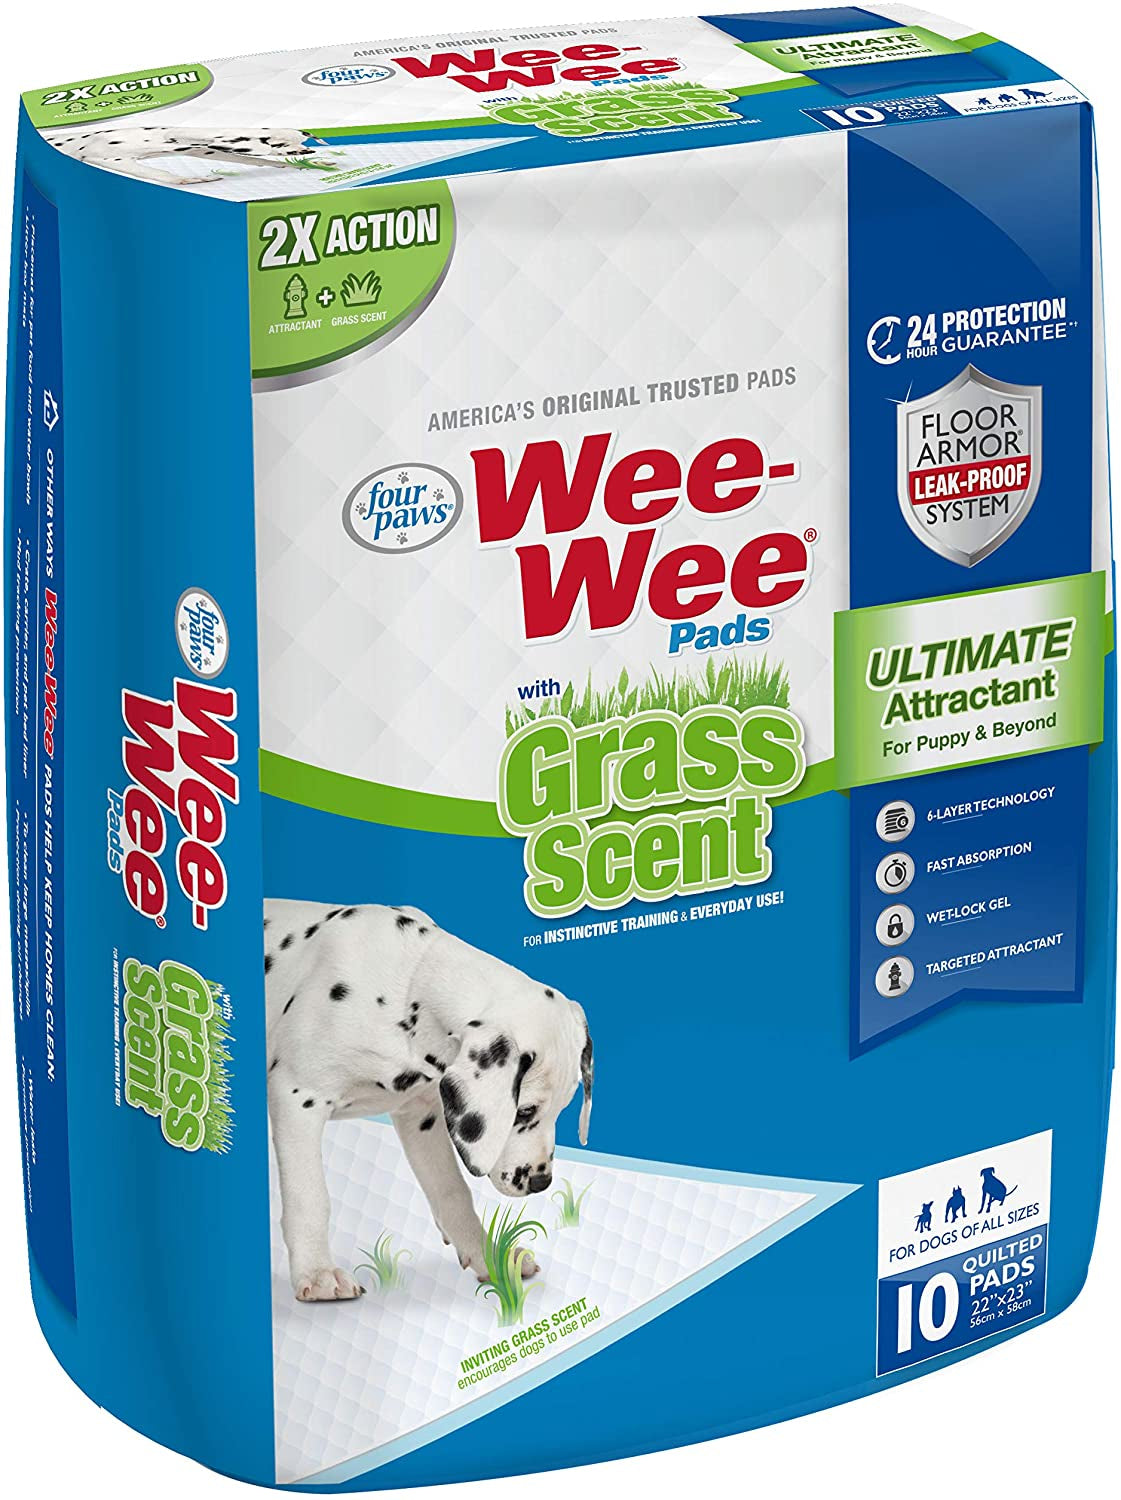 60 count (6 x 10 ct) Four Paws Wee Wee Grass Scented Puppy Pads